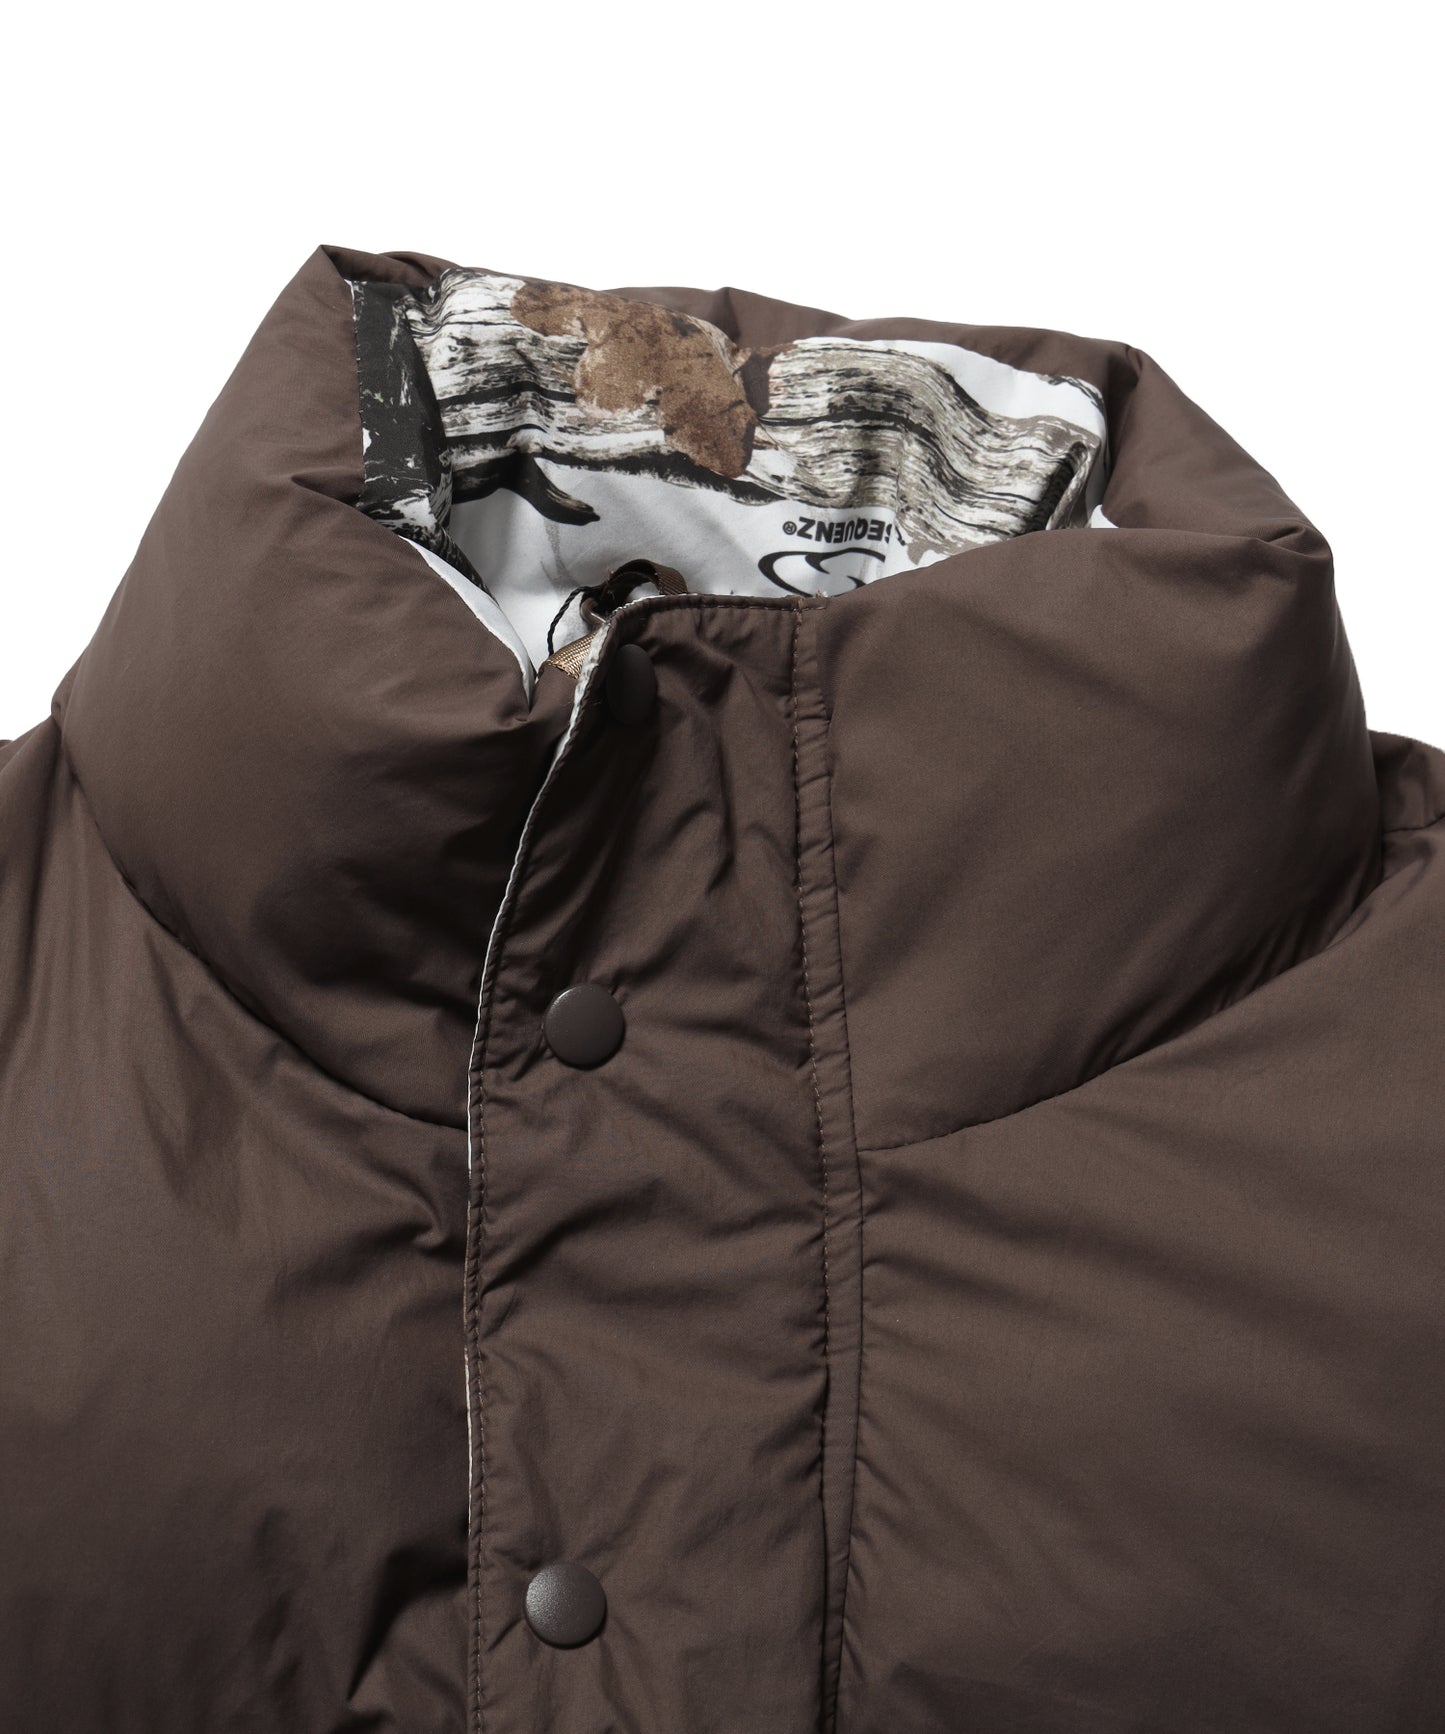 【SEQUENZ】 REVERSIBLE SYNTHETIC DOWN JACKET / リバーシブル ナイロン スタンド ダウンジャケット ドローコード REAL TREE×BROWN